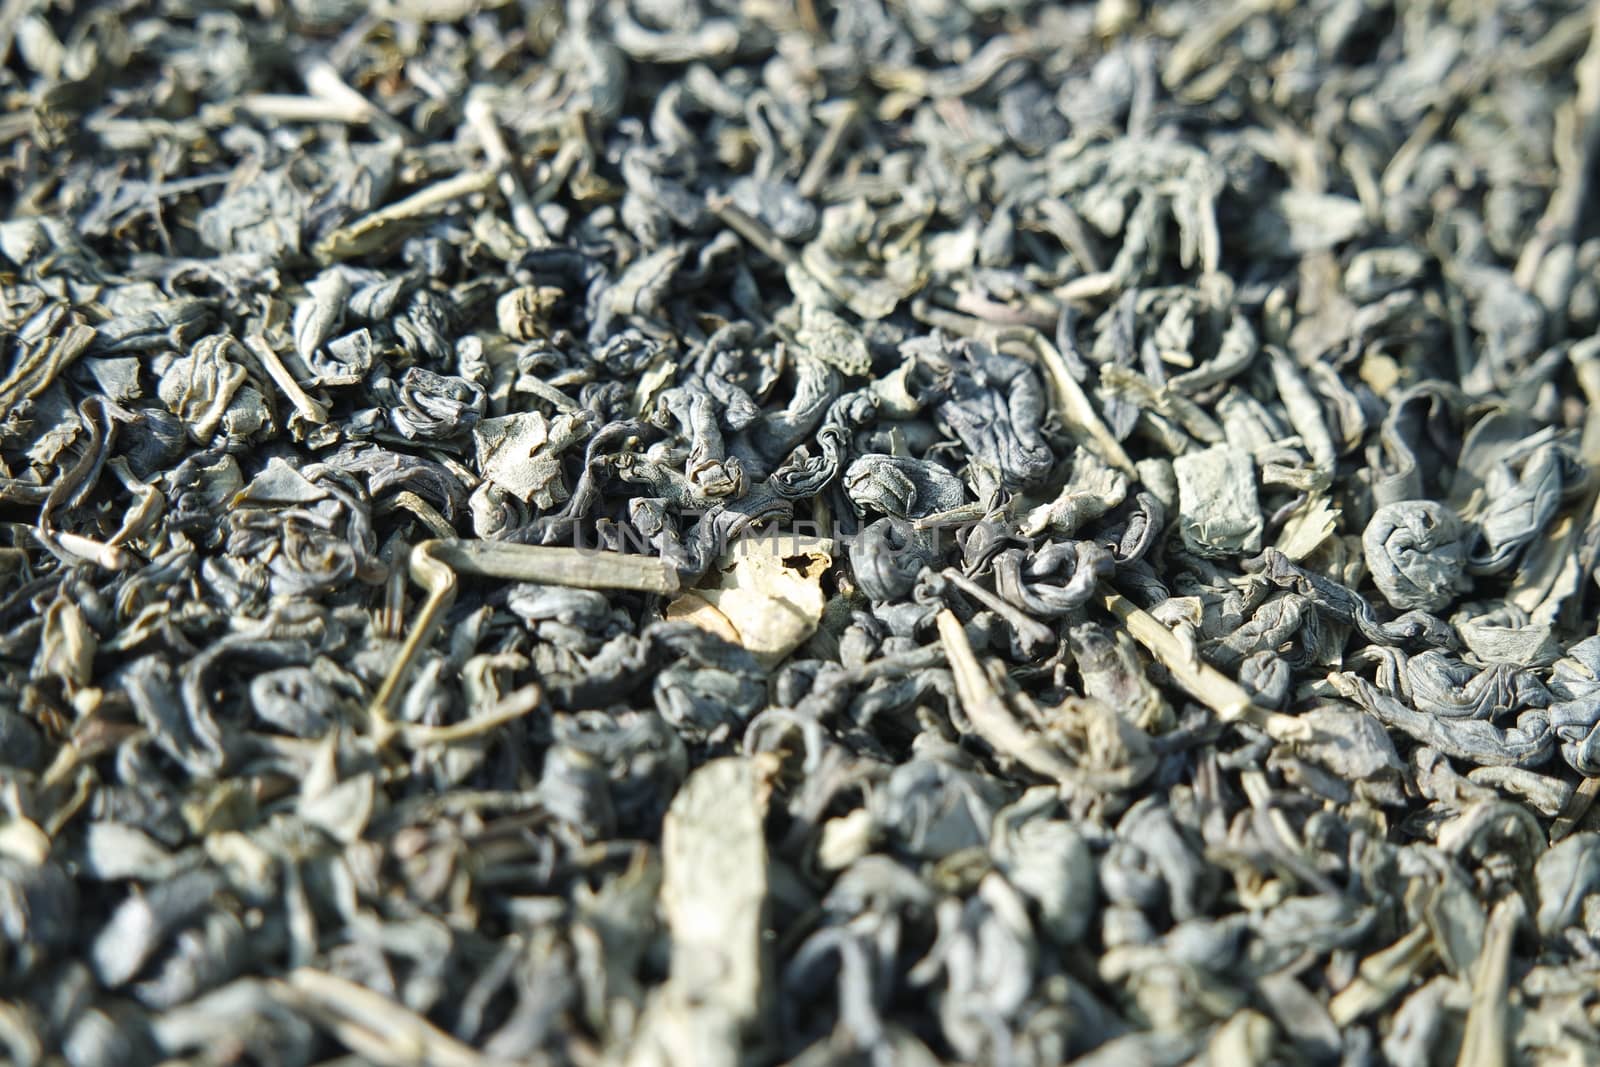 Close-up view of green tea dried leaves. Green tea or stevia rebaudiana leaves are of great medical importance for health.